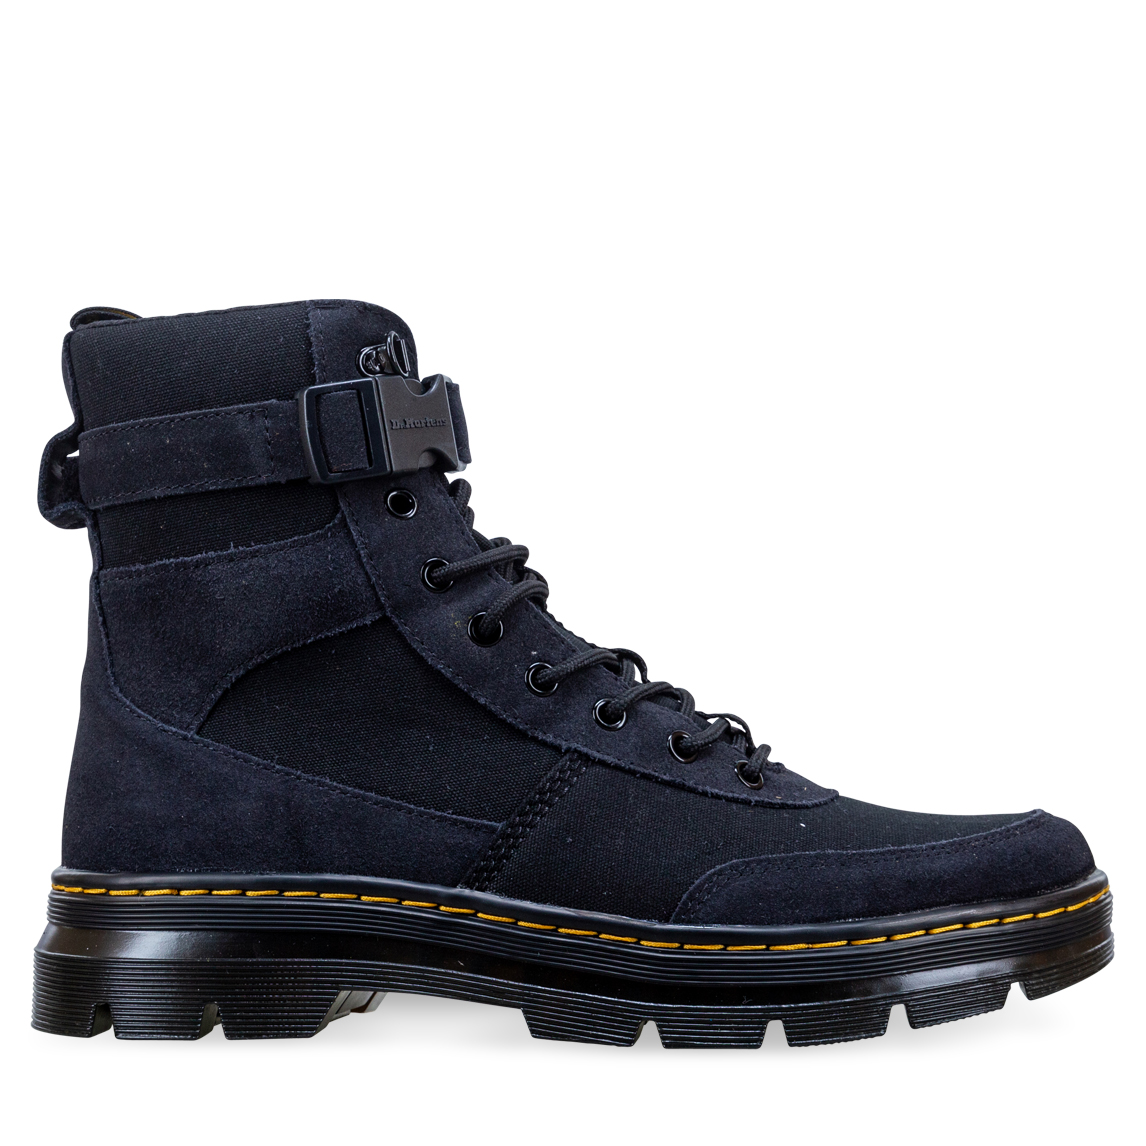 dr martens combs tech boots in black canvas